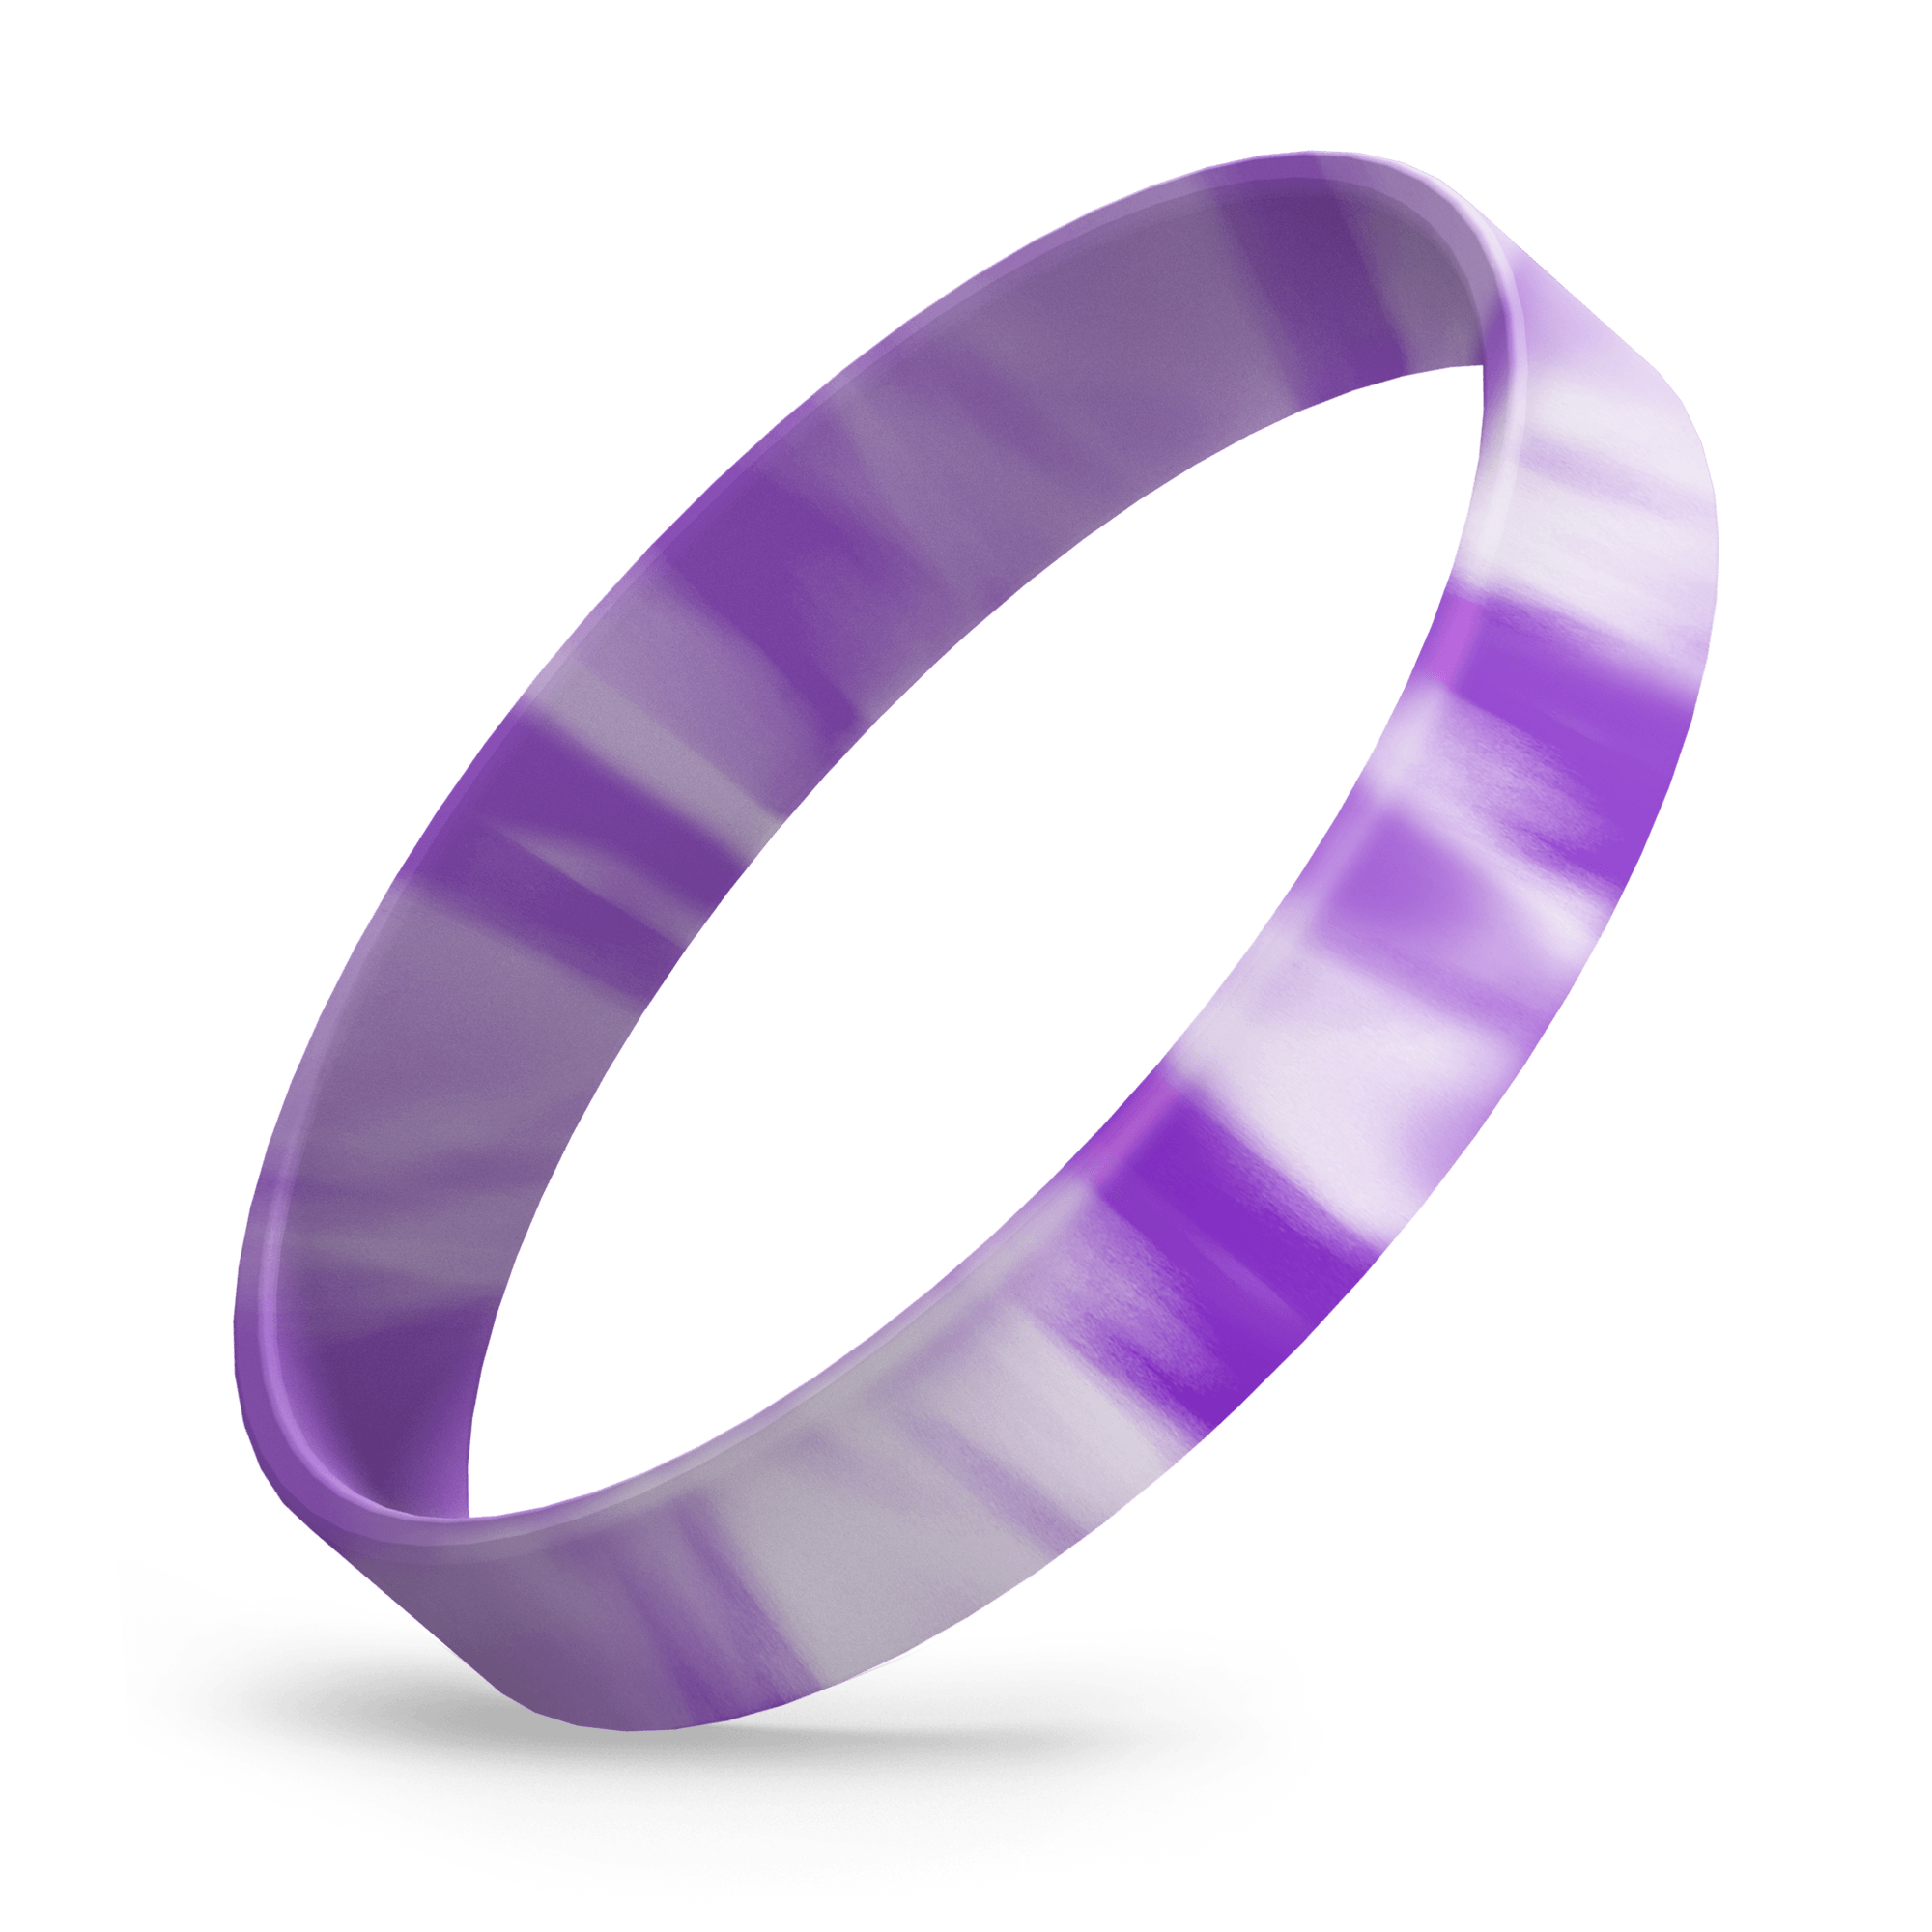 410 Purple Rubber Wristband Stock Photos Pictures  RoyaltyFree Images   iStock